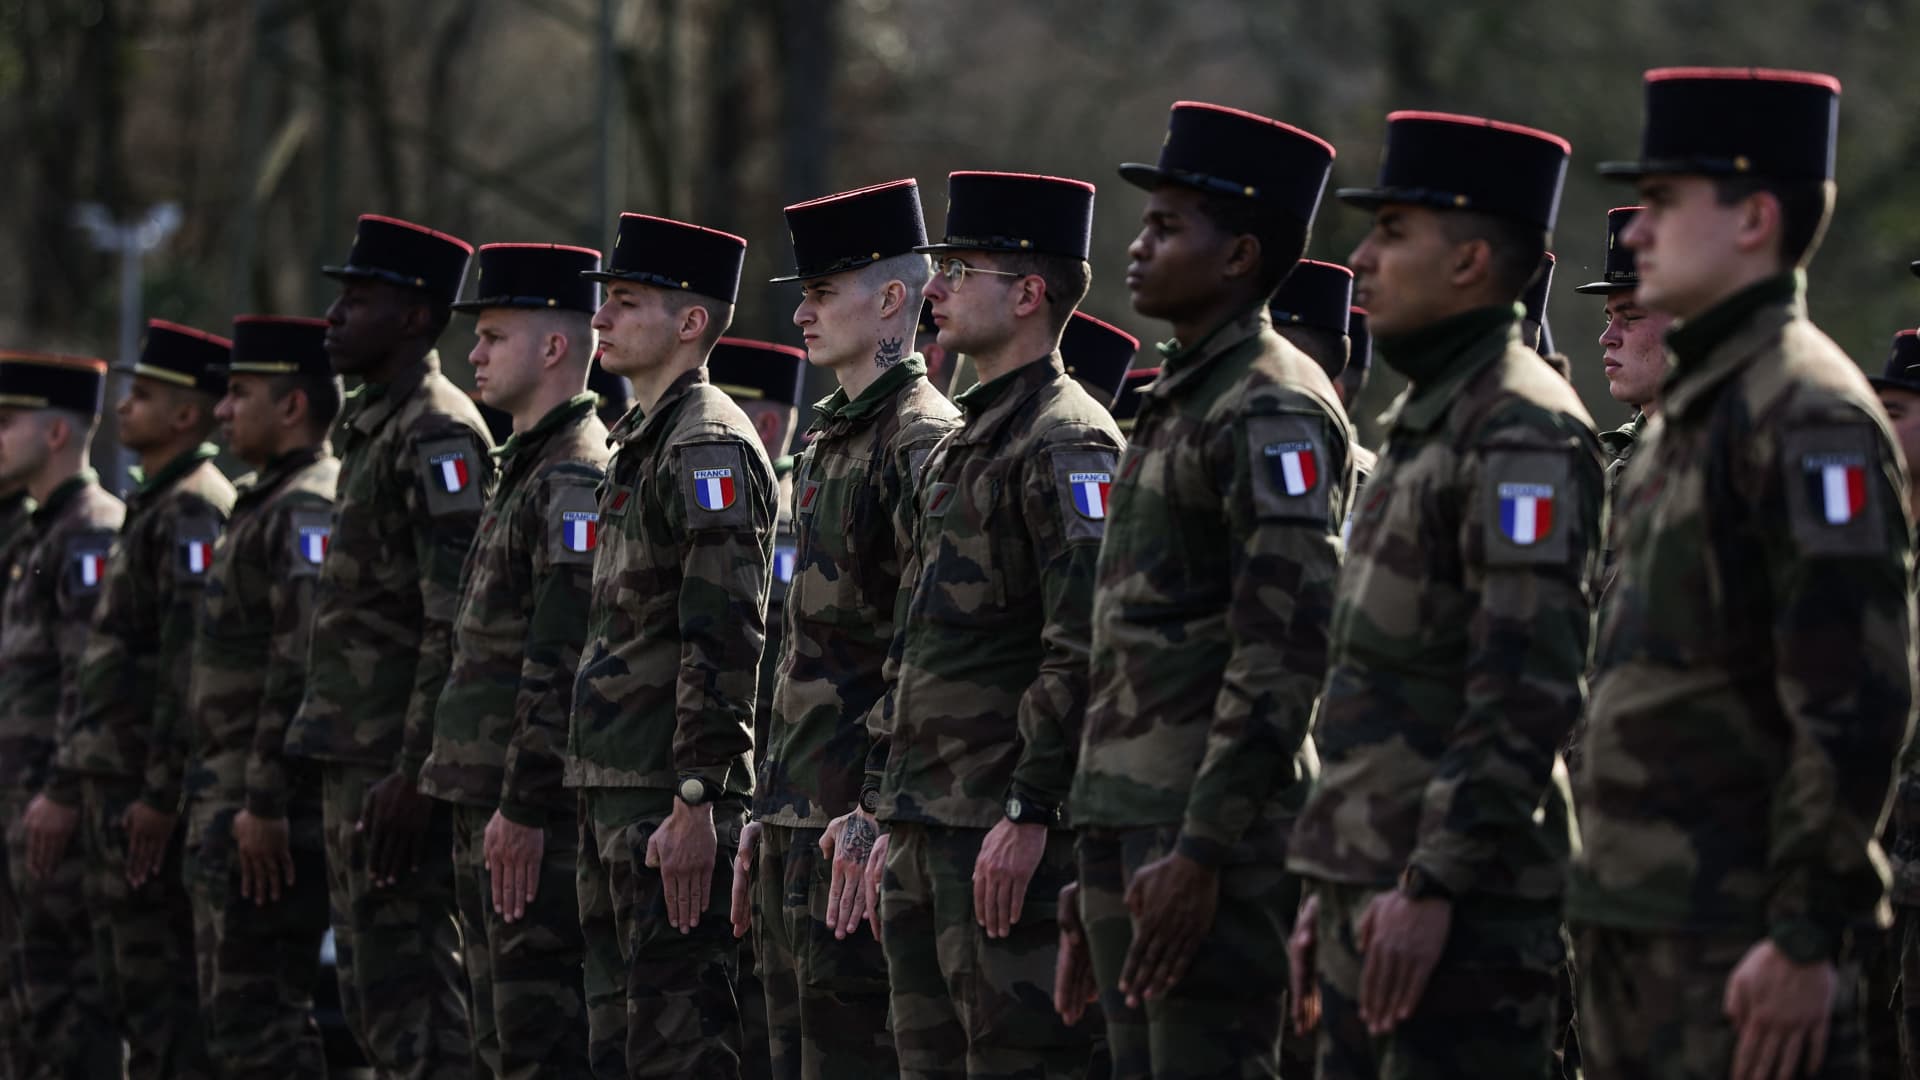 French soldiers of the Infantry Regimentstand in line as they prepare to leave for Romania, at the Caserne Brune et Laporte base in Brive-la-Gaillarde, central France, on March 1, 2022.